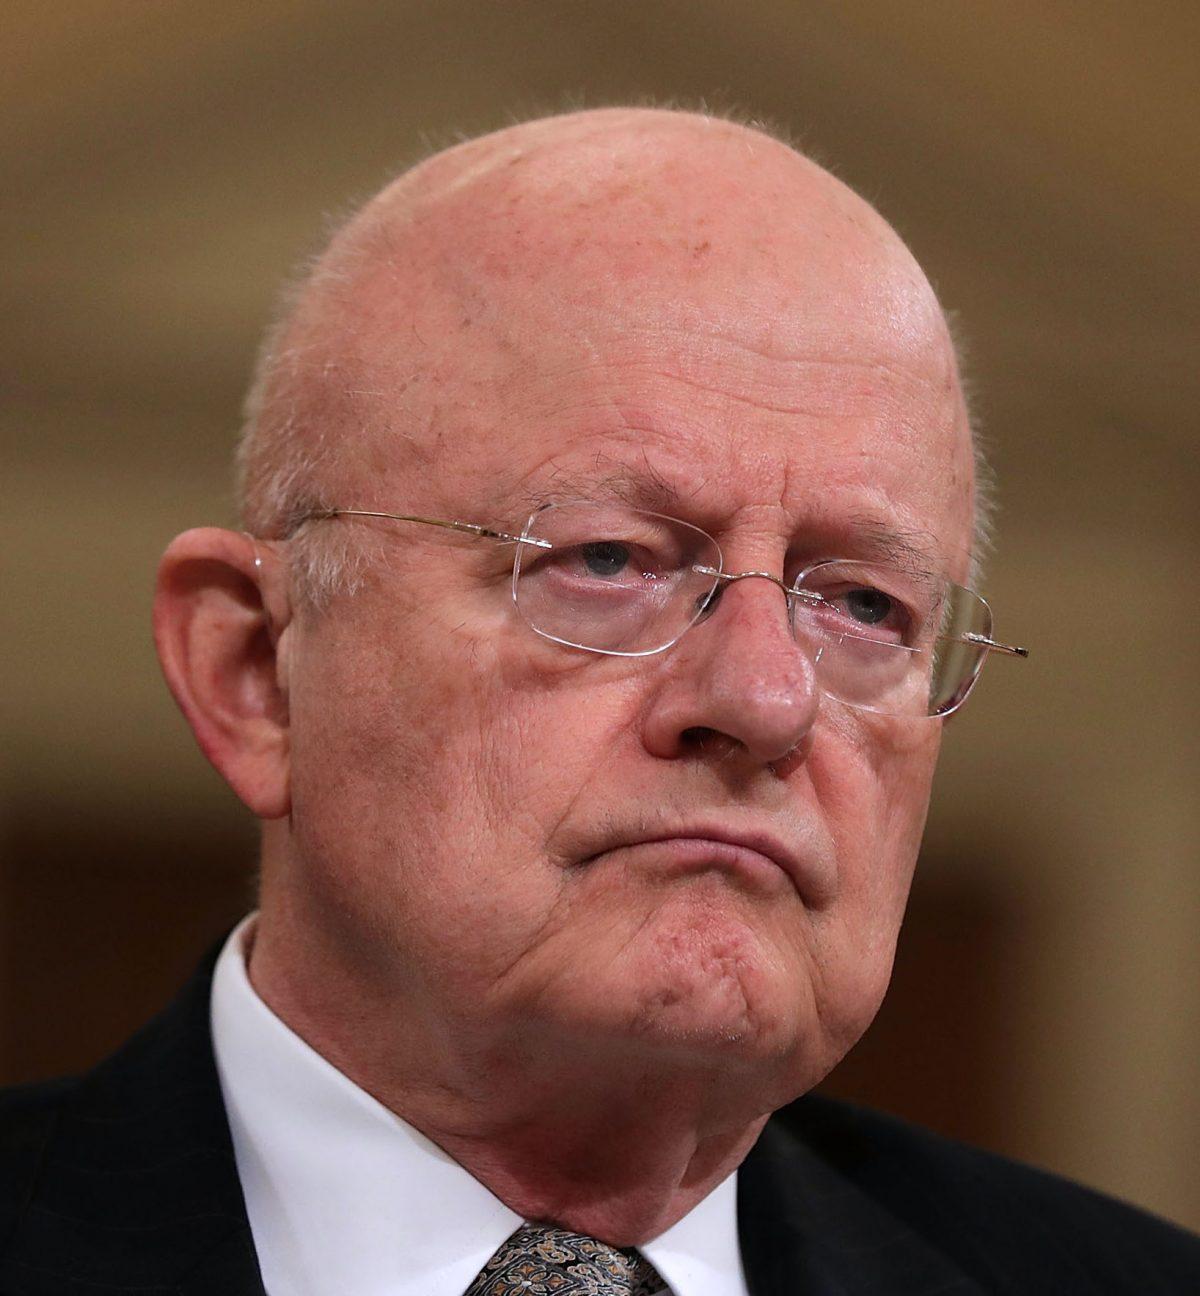 Former Director of National Intelligence James Clapper. (Alex Wong/Getty Images)